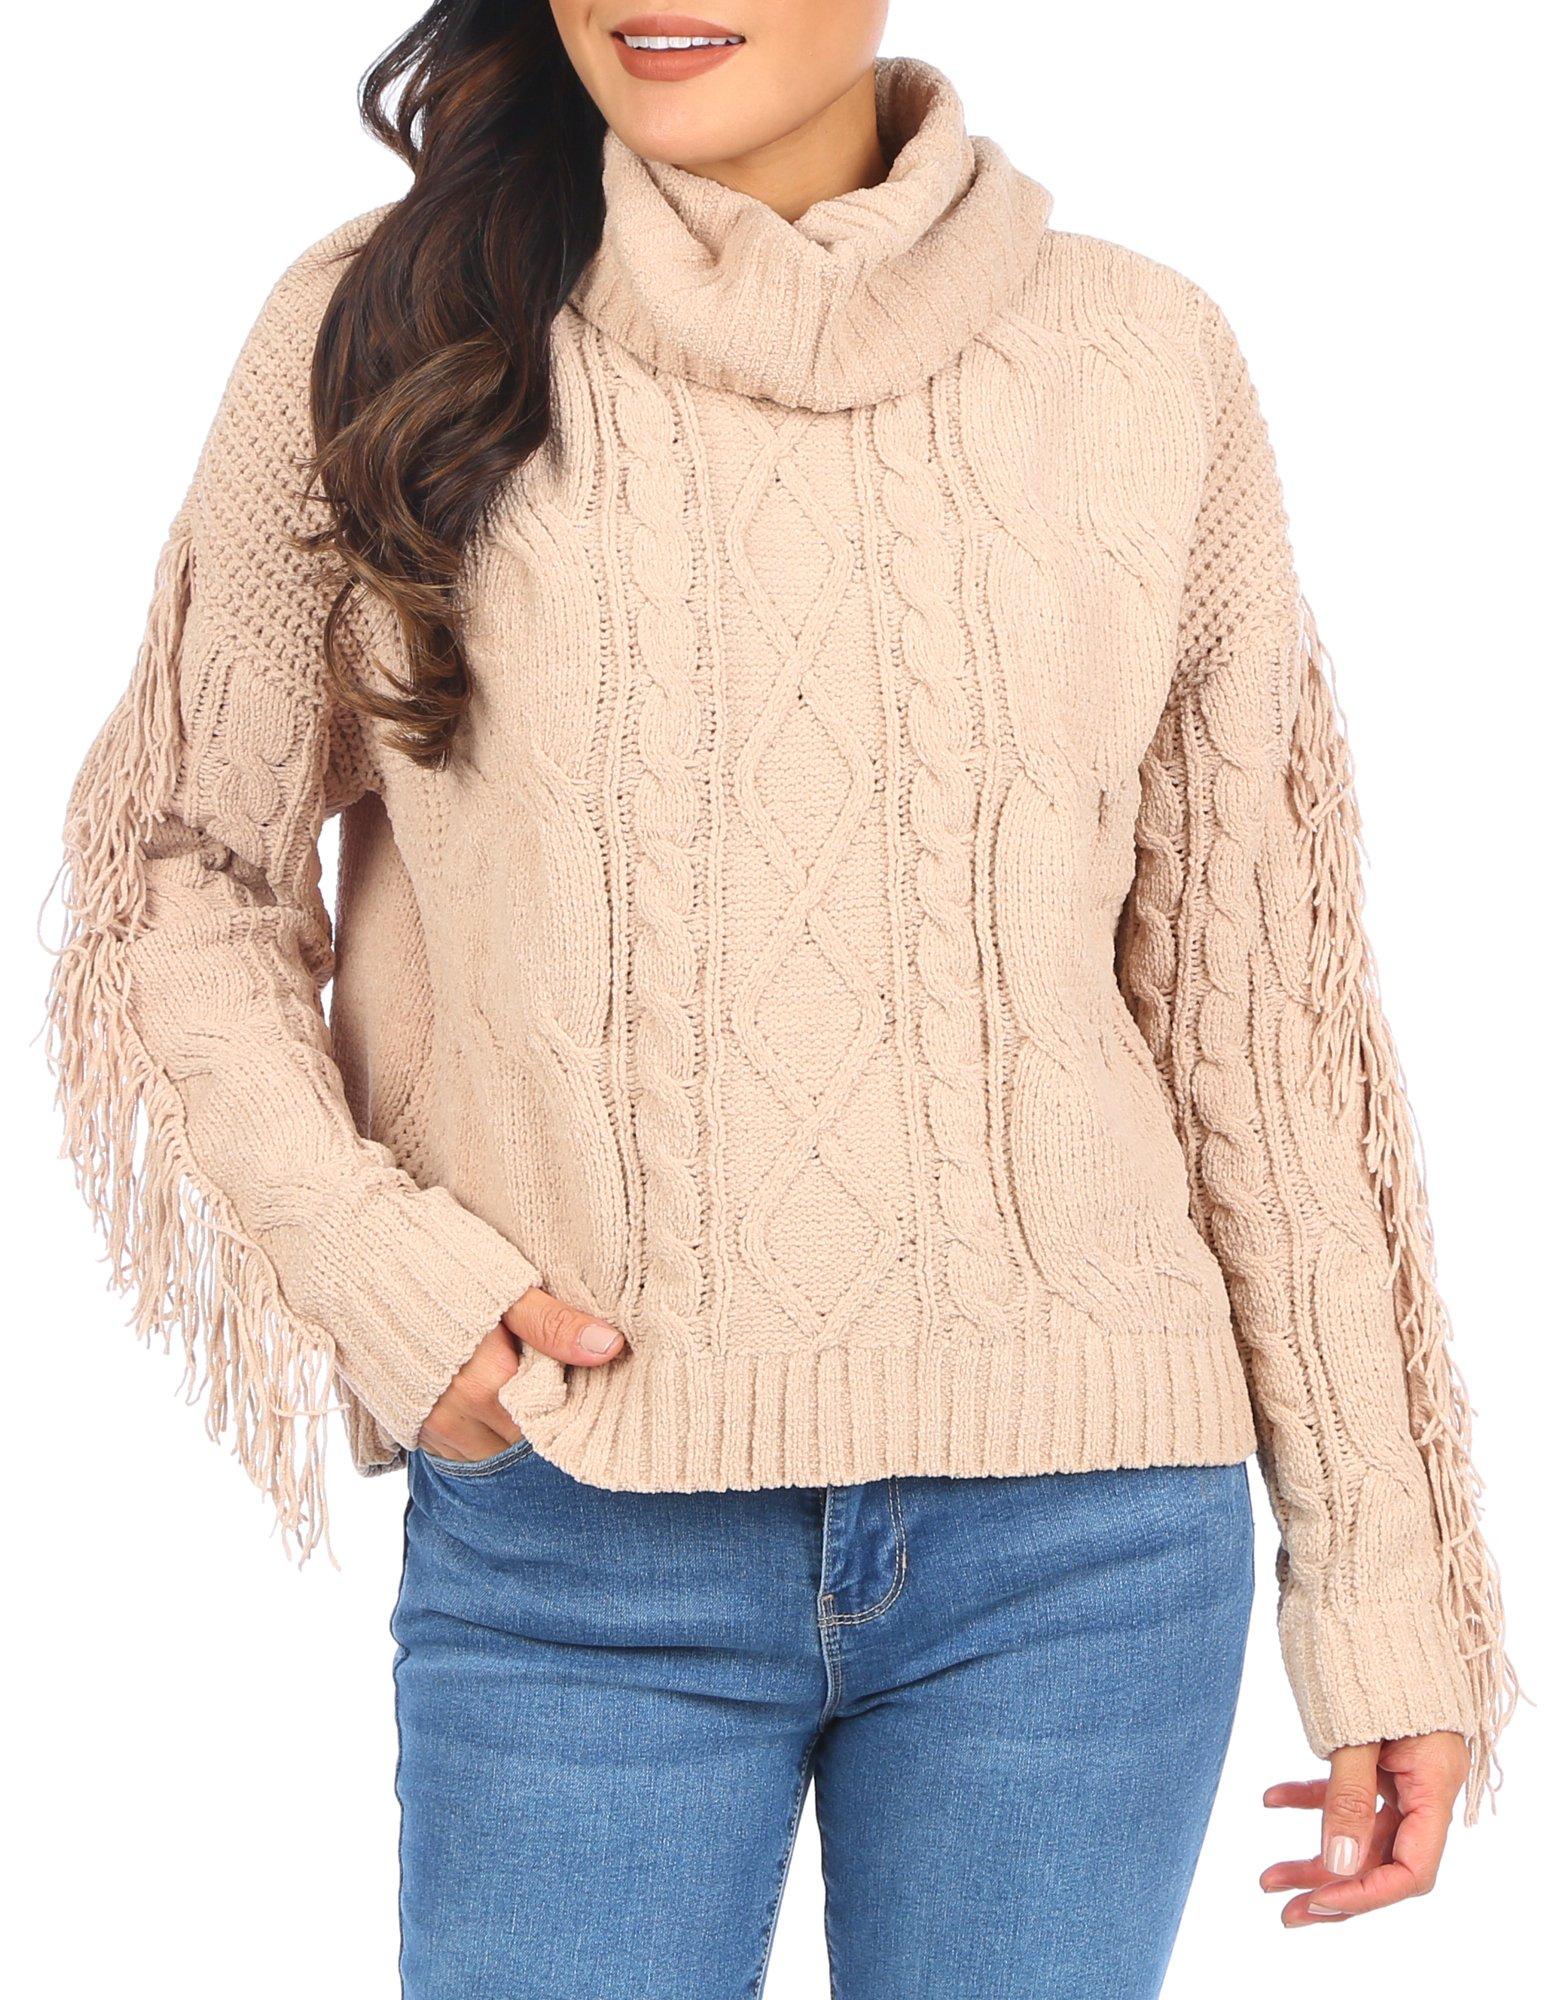 Women's Solid Cable Knit Sweater